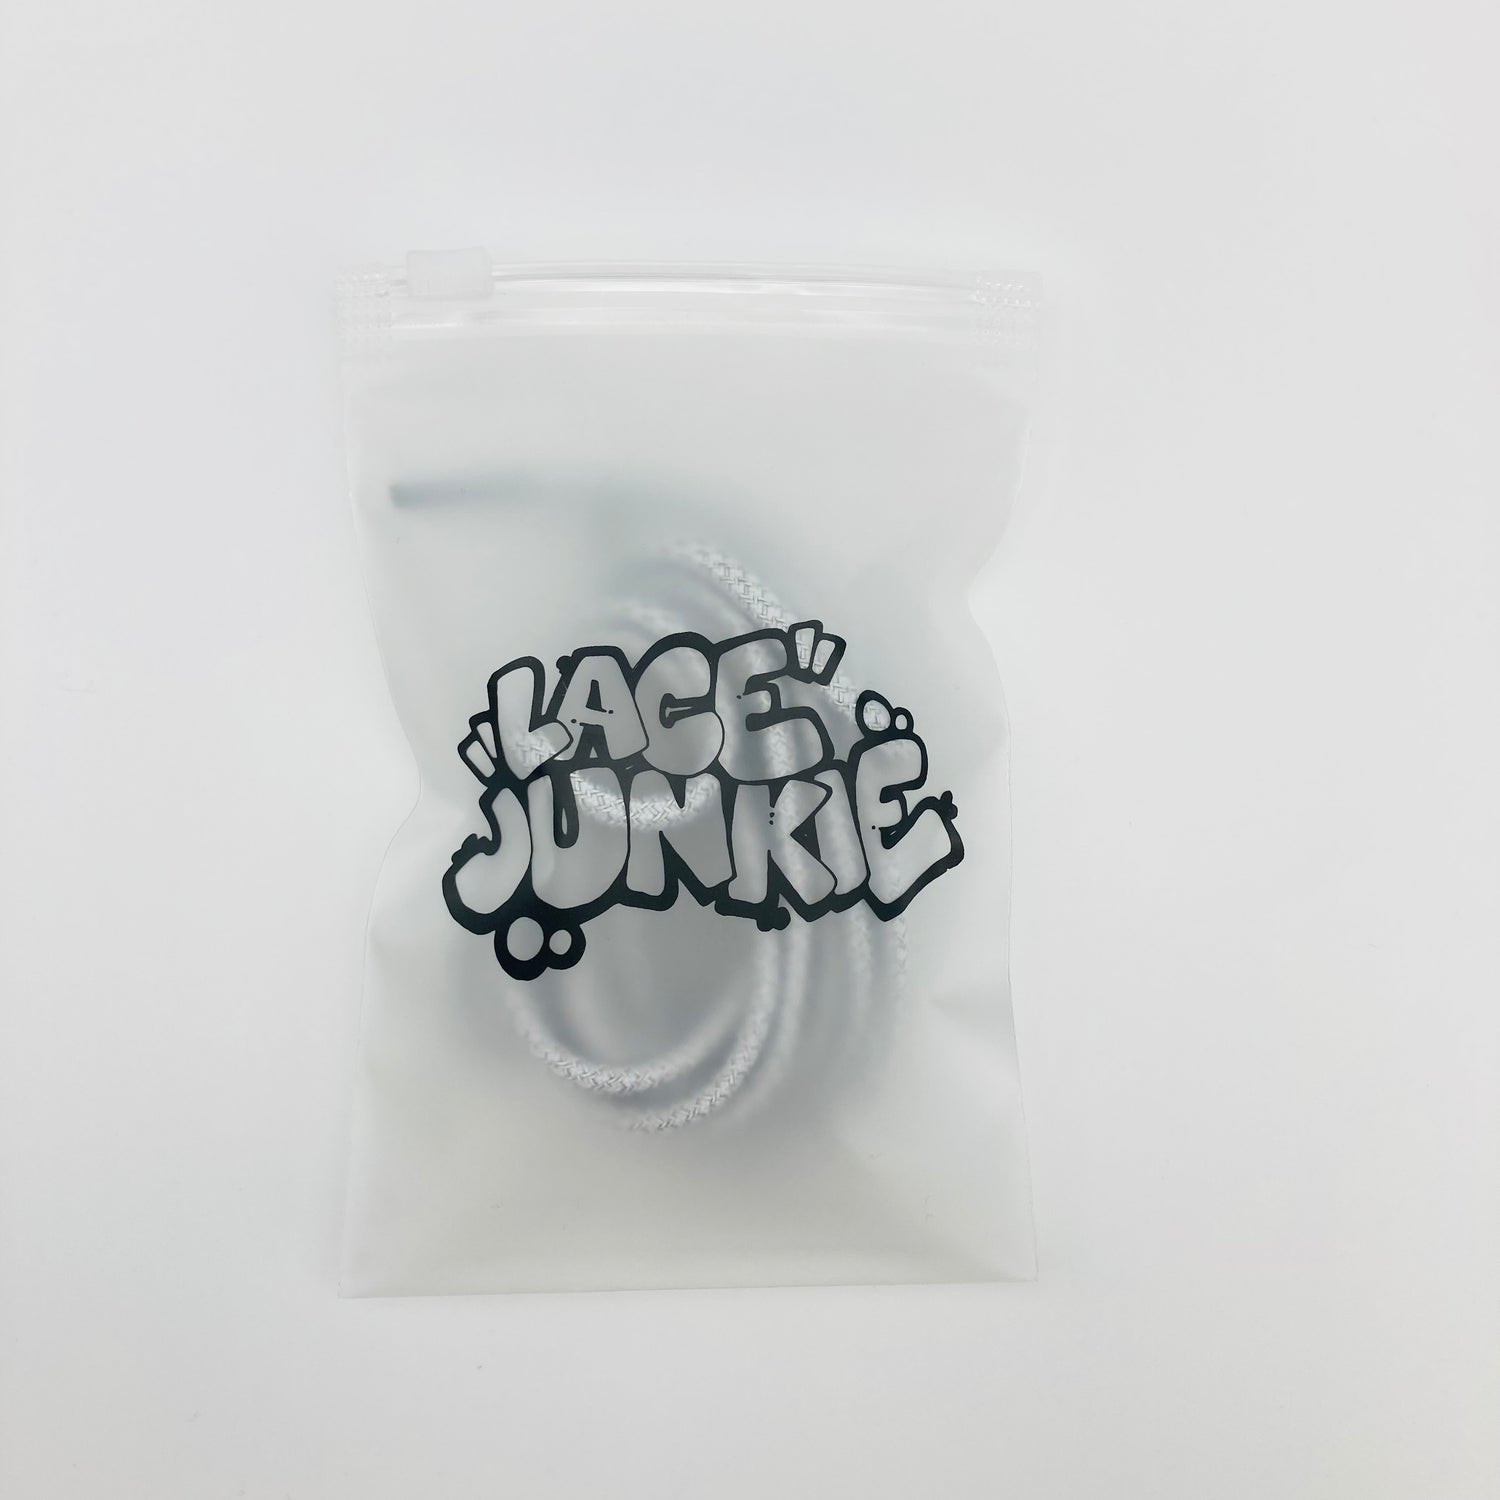 Lace Junkie White 3M Reflective Rope Laces